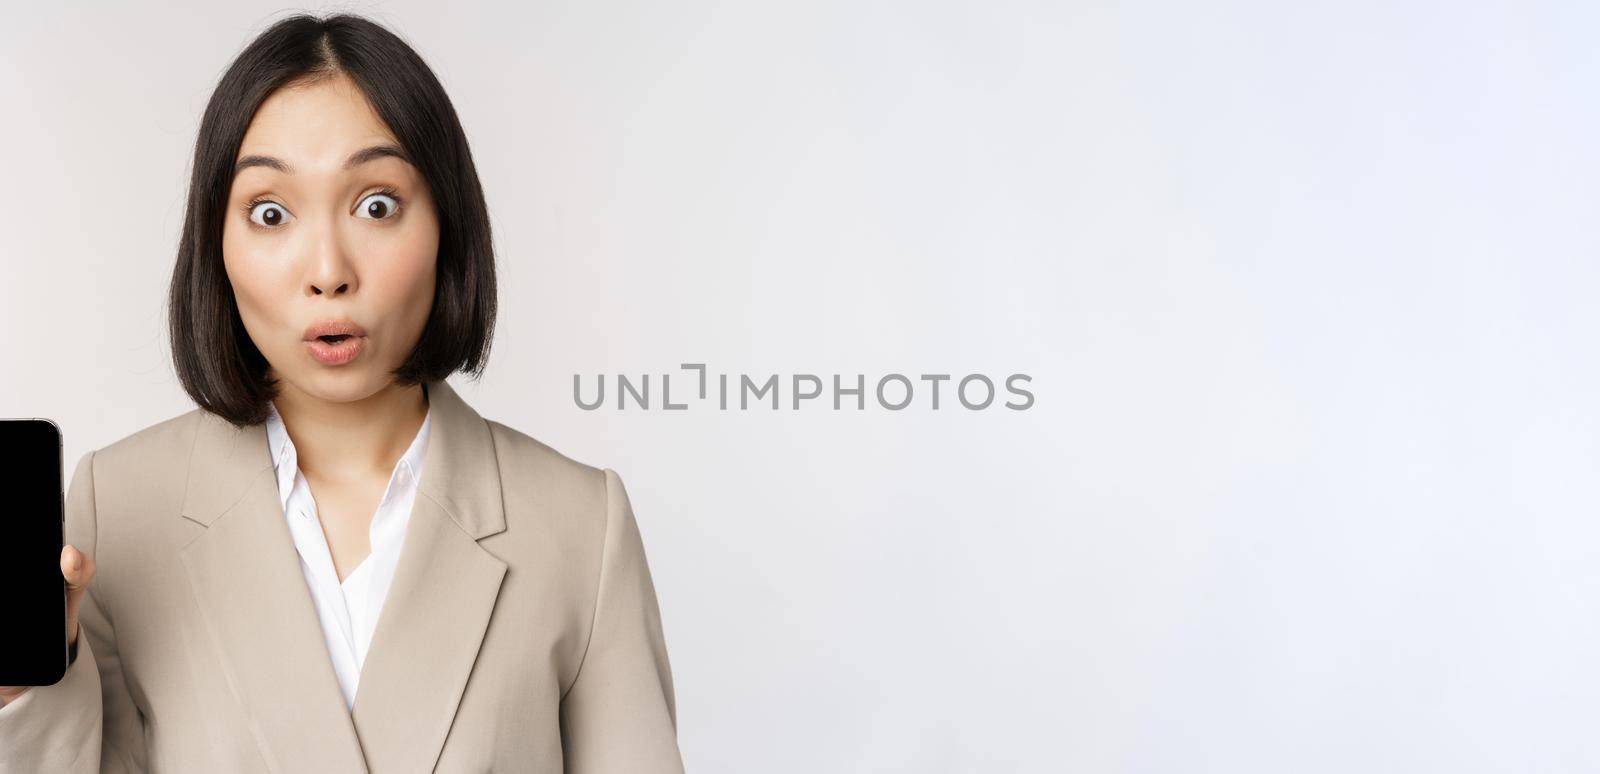 Image of asian corporate woman showing app interface, mobile phone screen, making surprised face expression, wow, standing over white background.